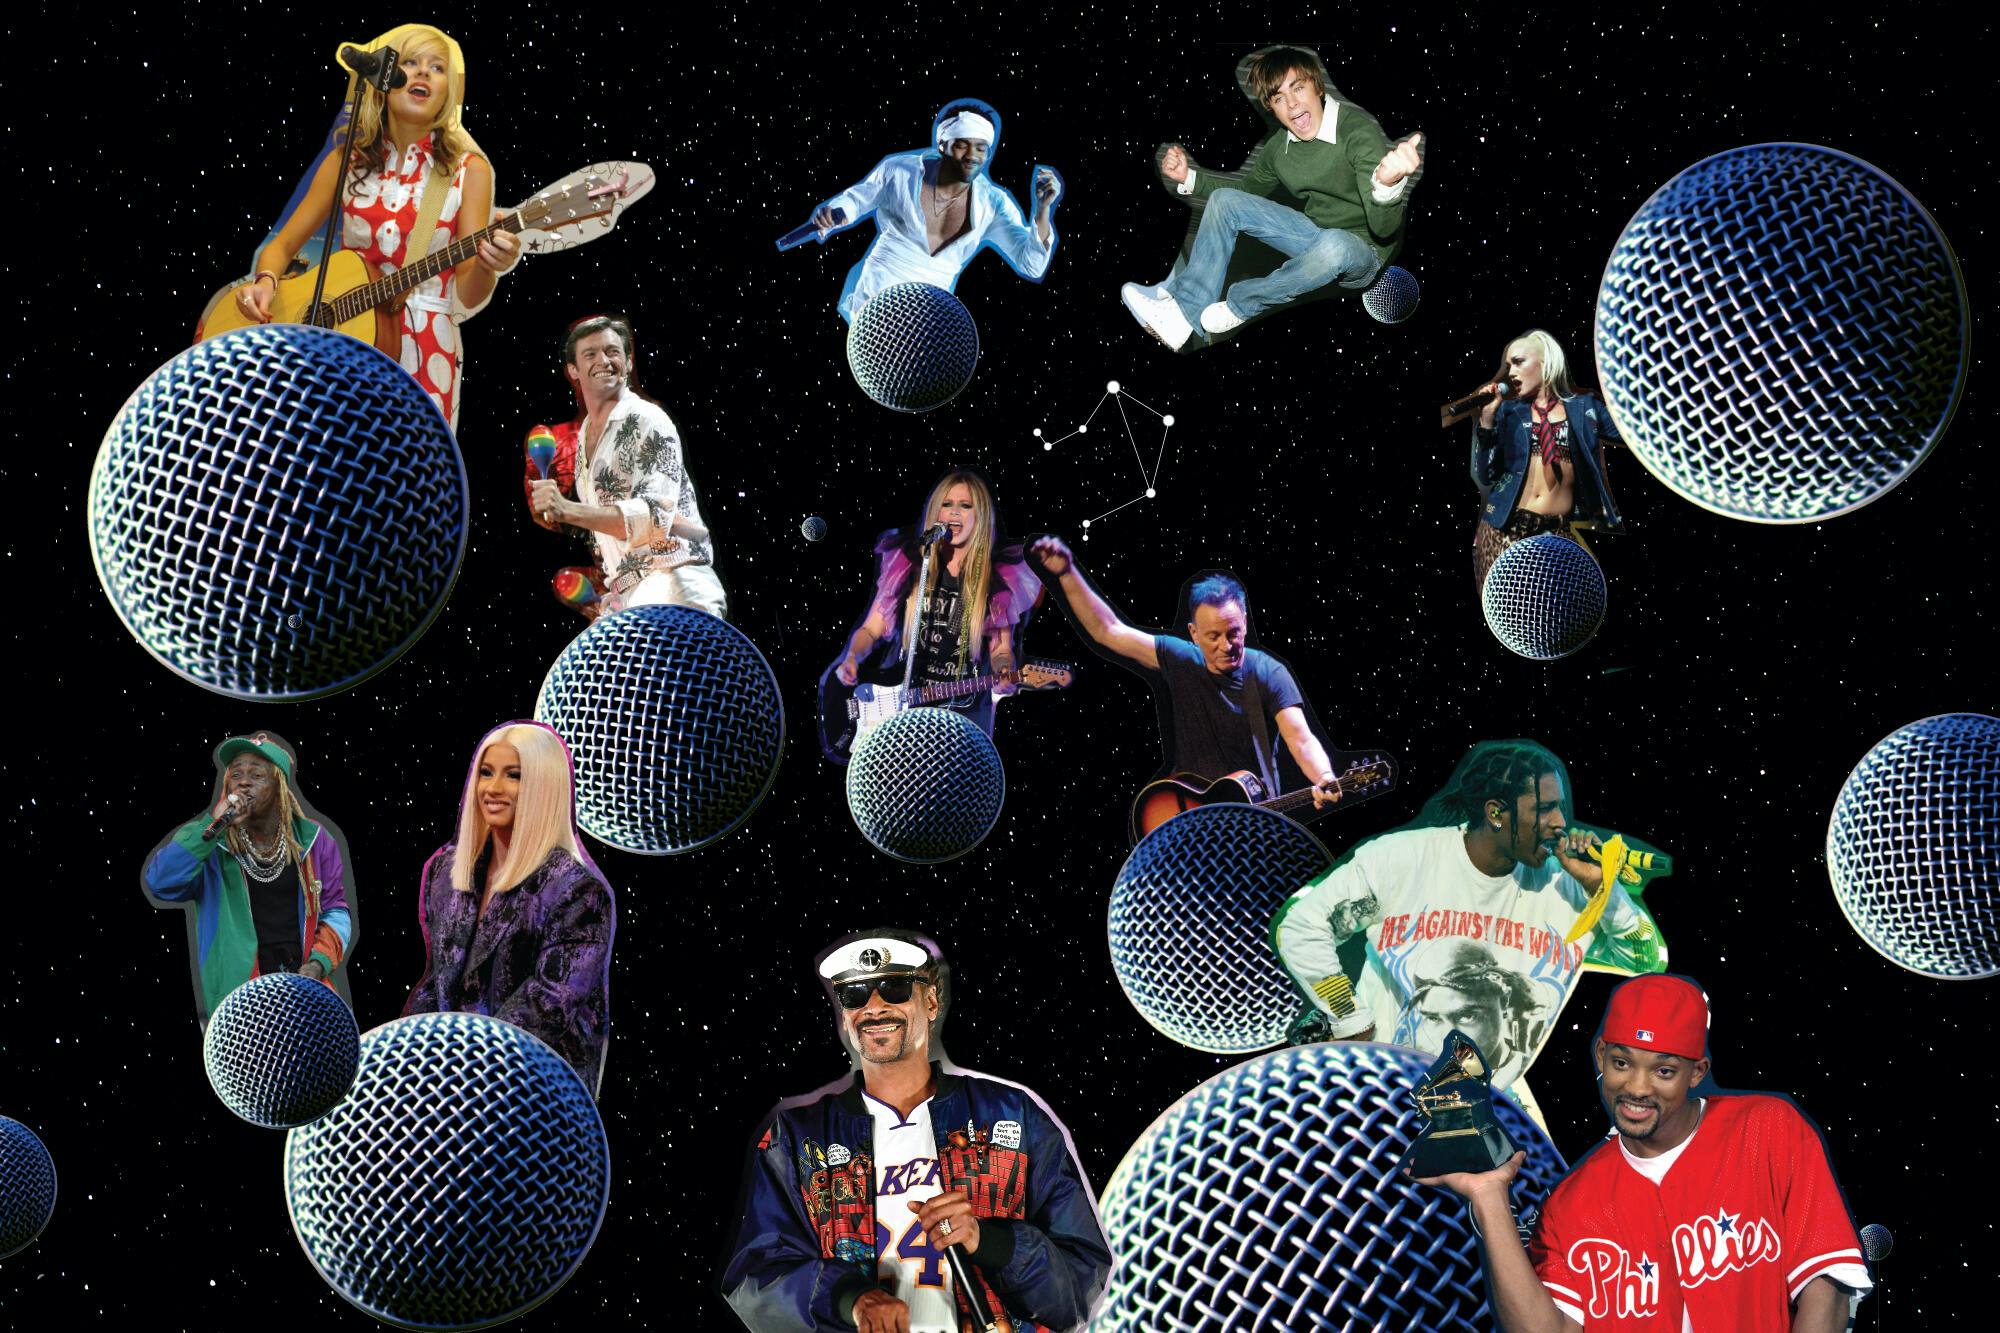 Netflix’s lyrical libras float through outerspace on microphone planets. From top left to bottom right: Brie Larson plays guitar in a red dress, Donald Glover jams in all white, Zac Efron brings all the musical theater energy in a Wildcats pose, Gwen Stefani looks fierce in a leather jacket and tie, Hugh Jackman weirdly plays the maracas, Avril Lavigne plays electric guitar in an angsty fit, Bruce Springsteen winds up for a guitar strum, A$AP Rocky wears a Tupac “Me against the world” shirt, Lil Wayne wears a matching hat and jacket, Cardi B glows in a purple blazer, Snoop Dogg wears a Lakers jersey and shades, and Will Smith holds a Grammy in a Phillies jersey and matching hat.